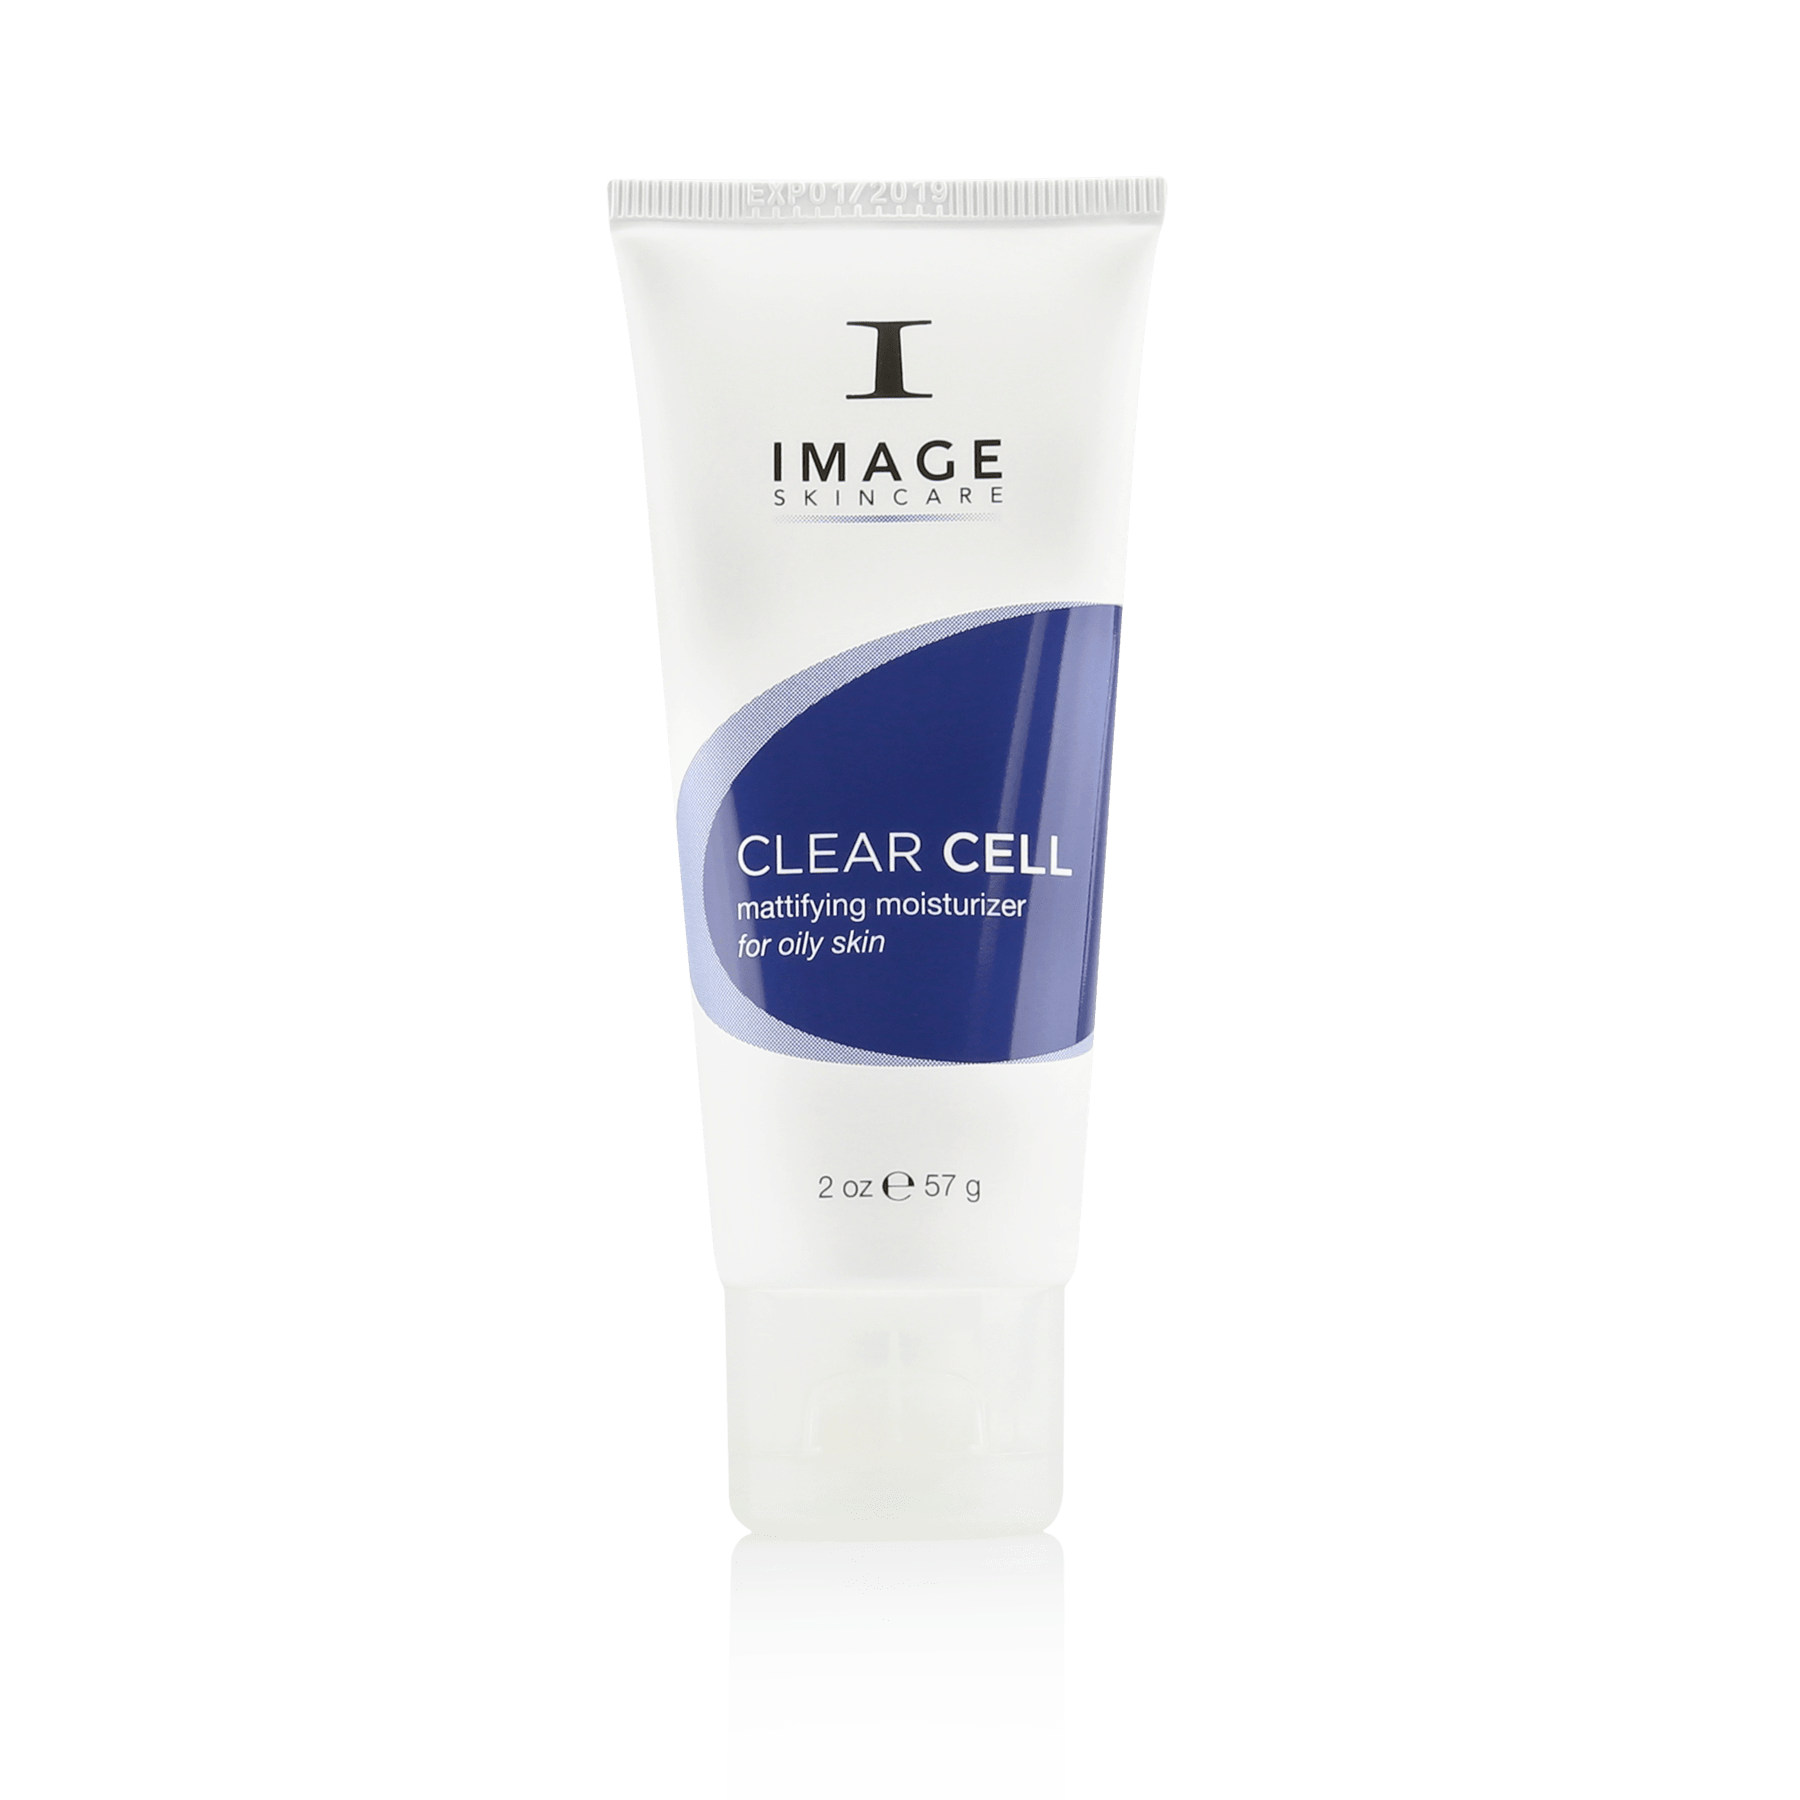 Image Skincare Clear Cell Mattifying Moisturizer 2oz